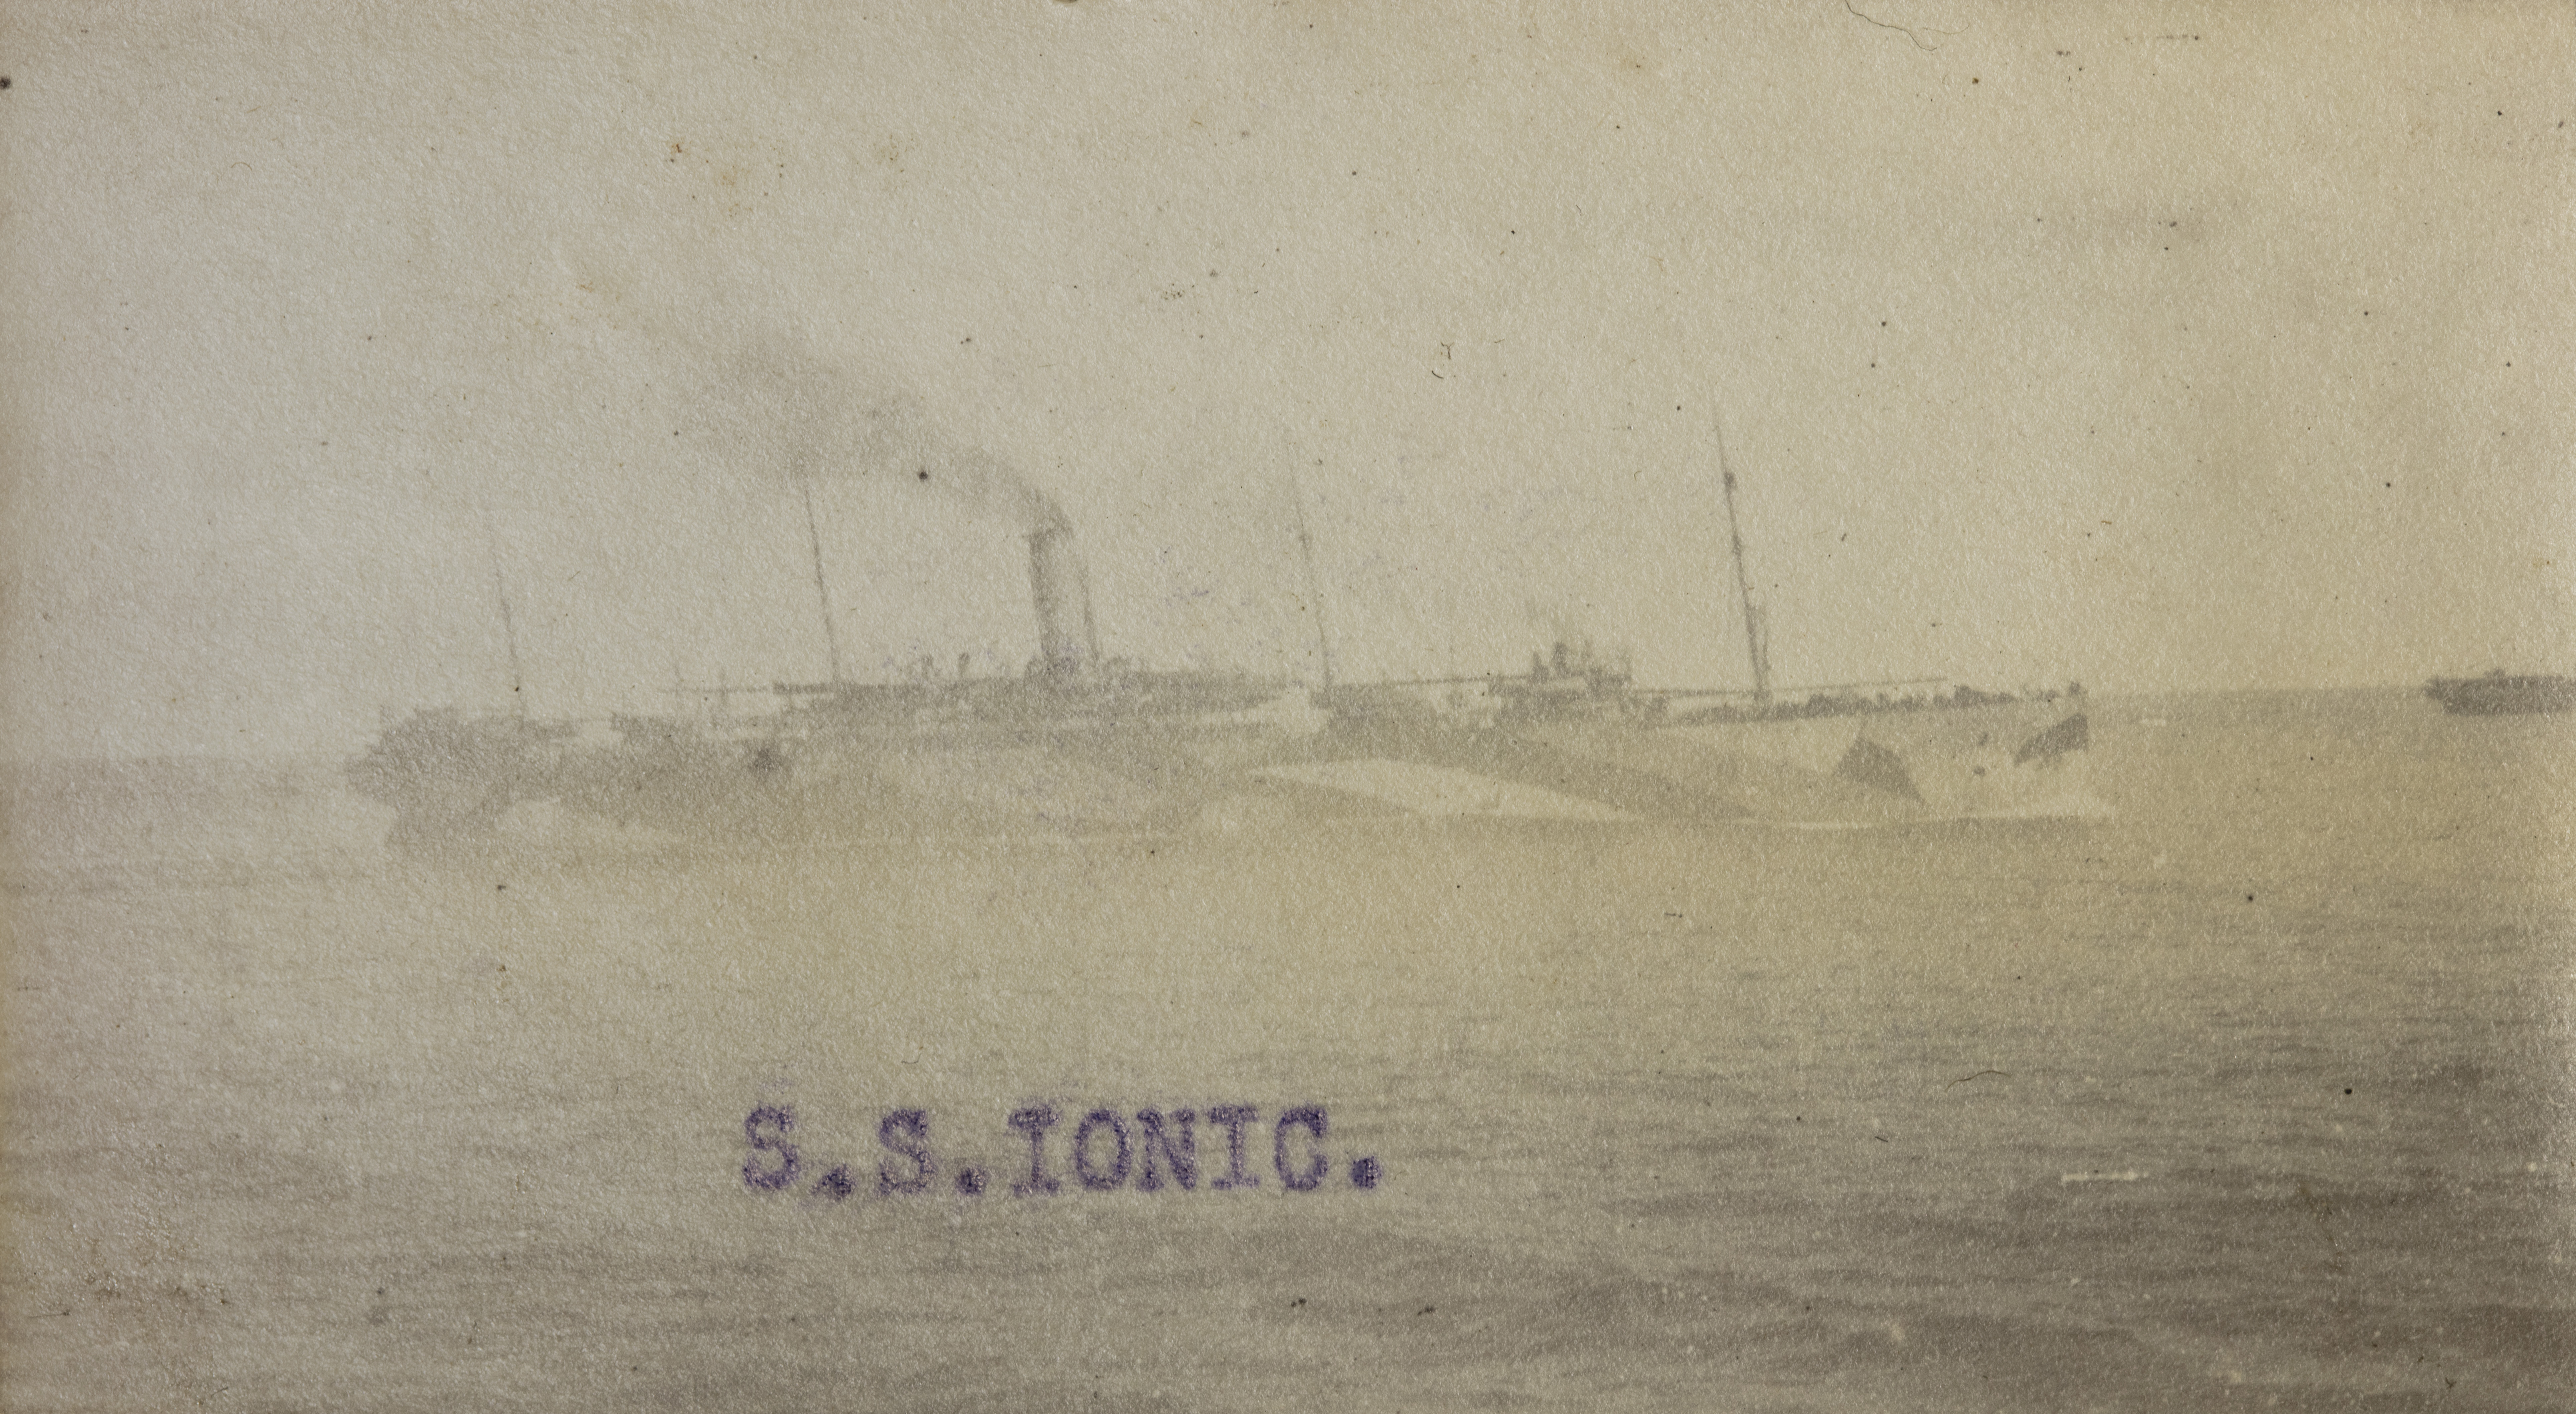 Image of Margaret’s postcard of the SS Ionic, a ship painted in dazzle camouflage